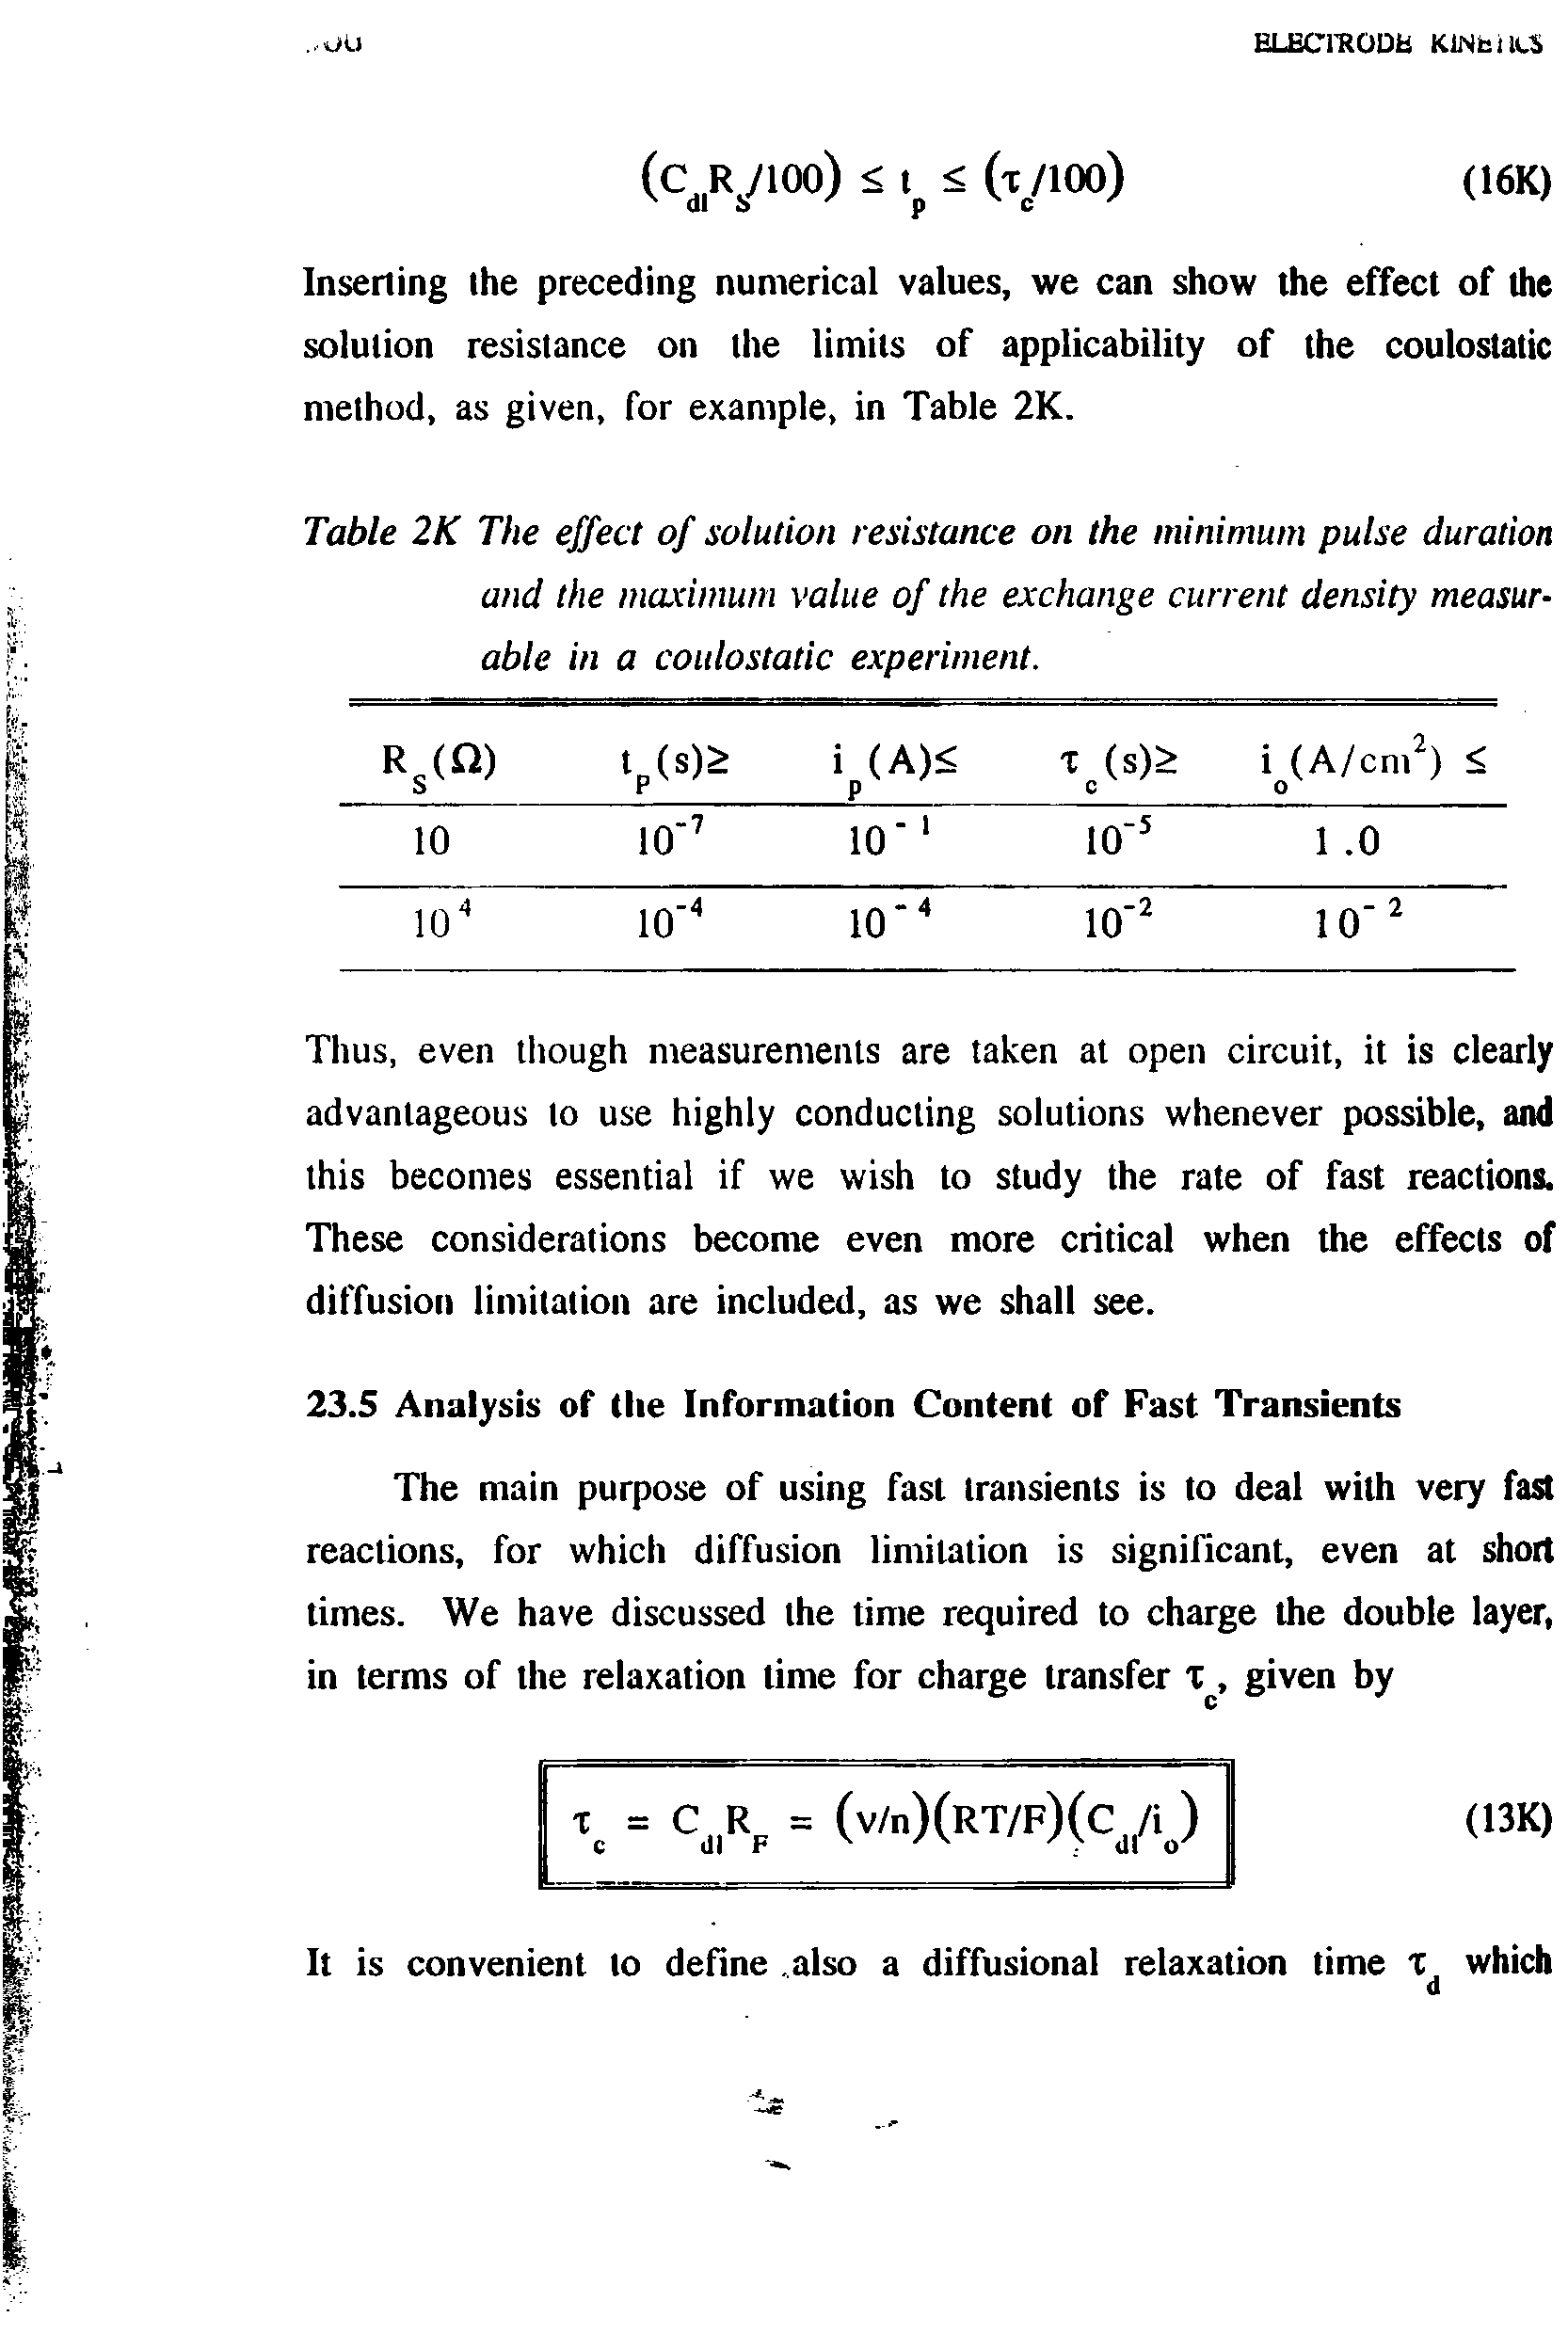 Table 2K The effect of solution resistance on the minimum pulse duration and the maximum value of the exchange current density measurable in a coulostatic experiment.